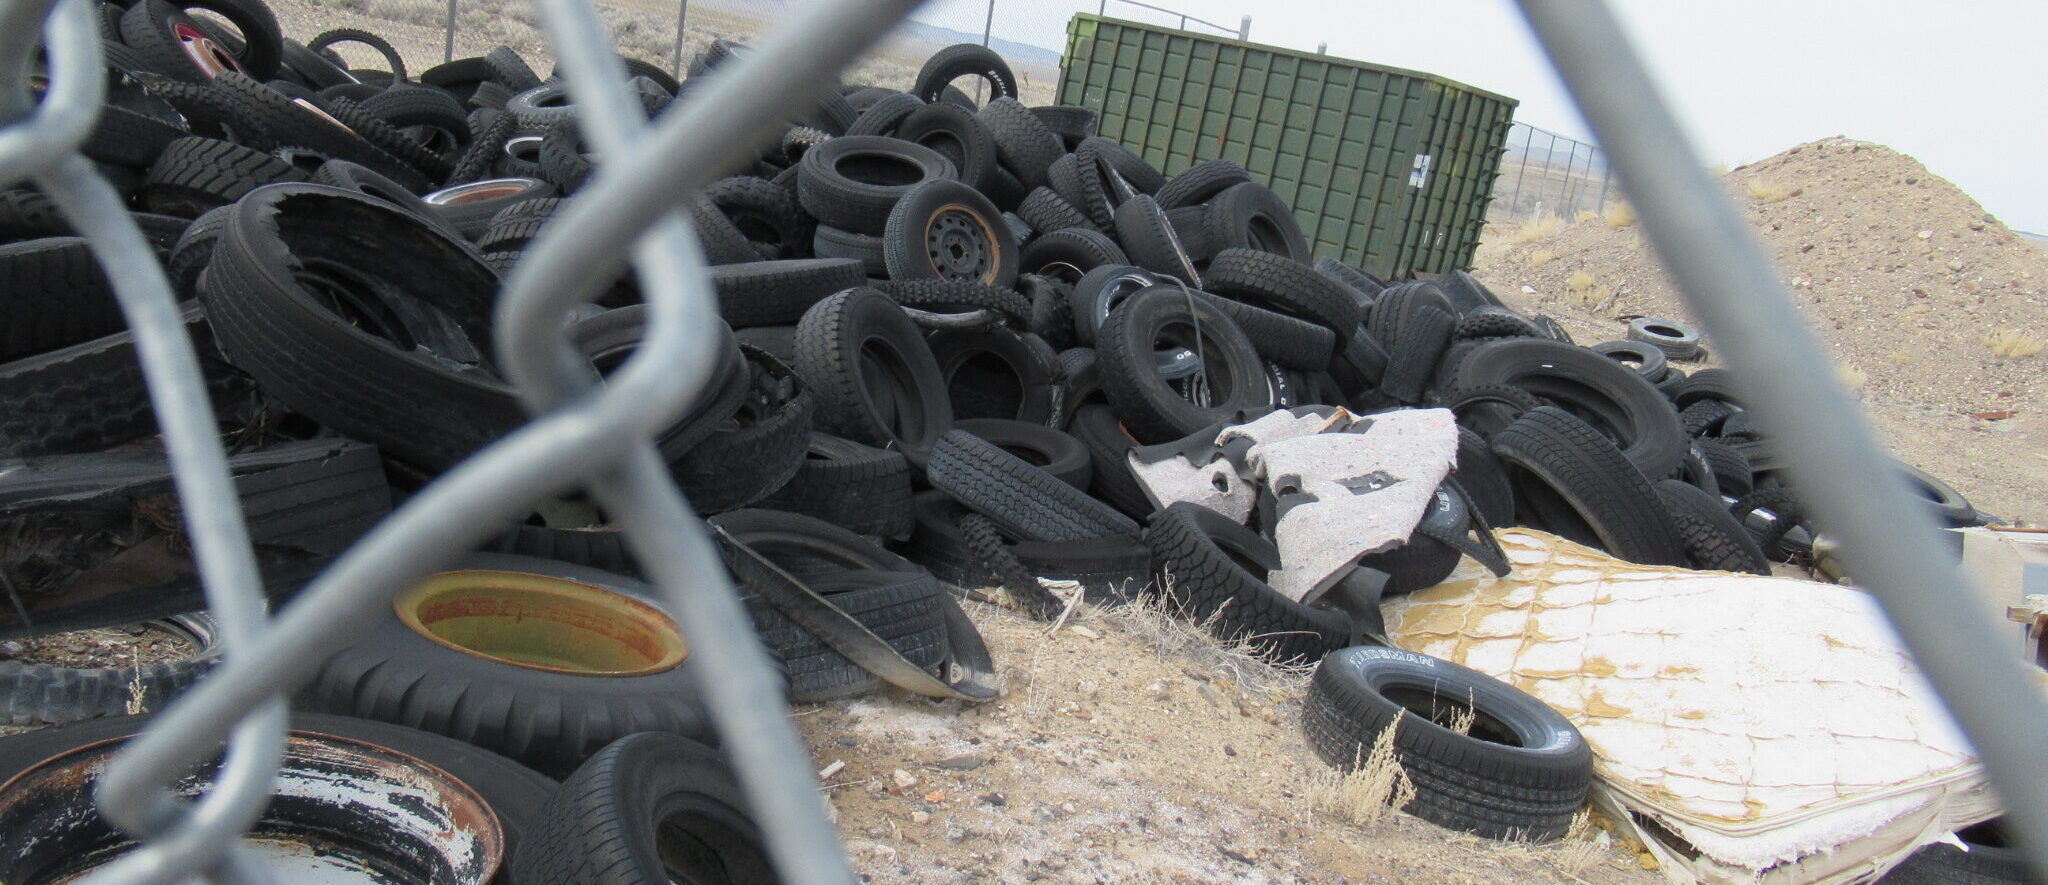 Tires and a large shipping container sit in a fenced landfill